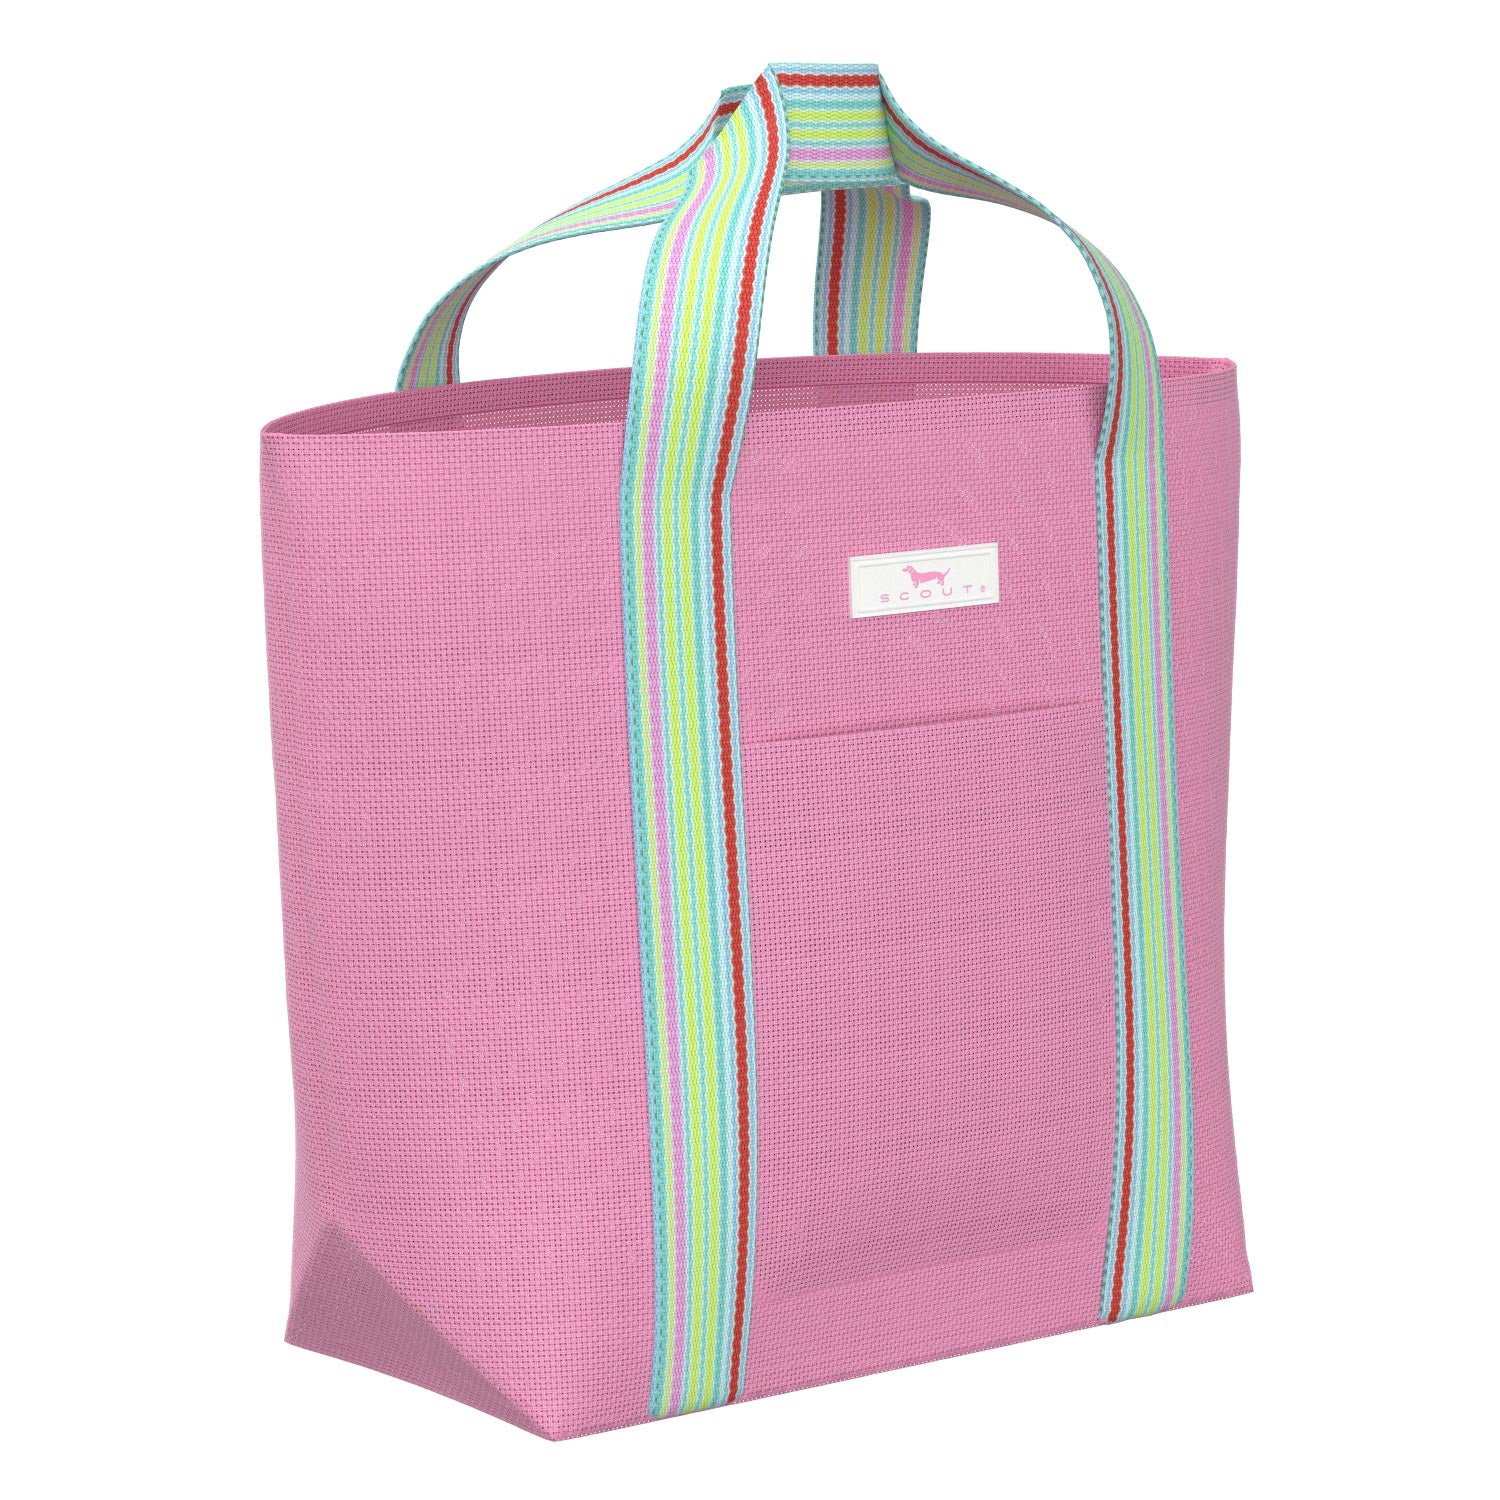 Grab and Go Small Tote Bag